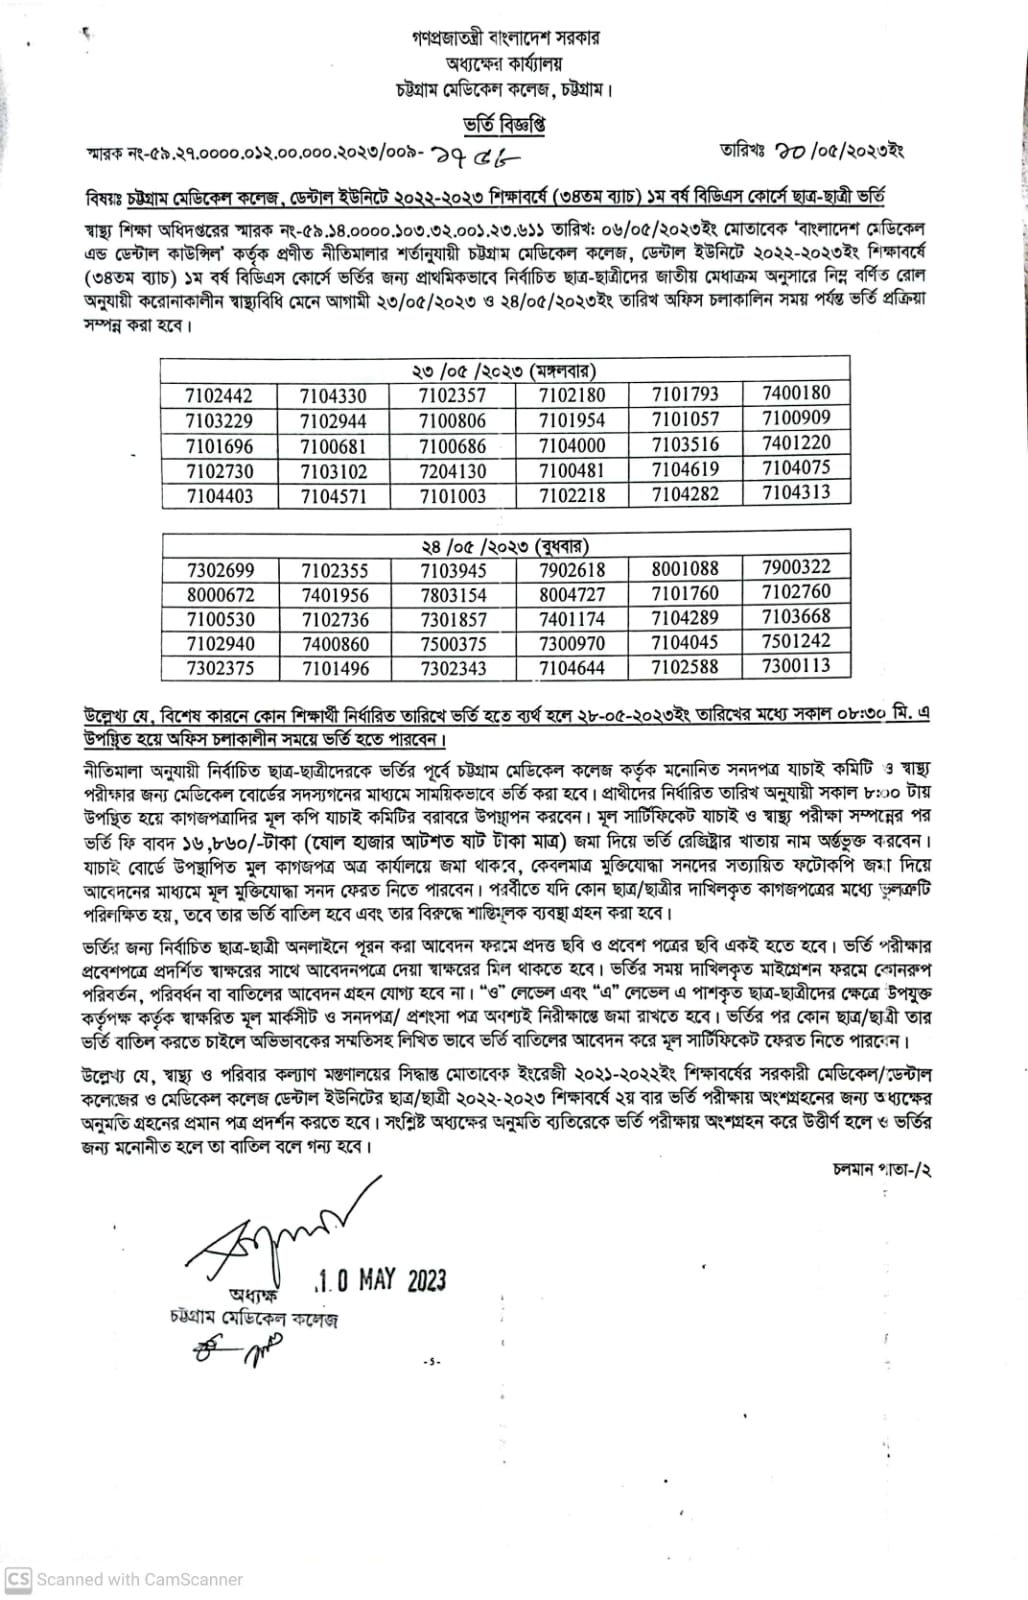 BDS Course Admission Notice for Academic Year 2022-2023